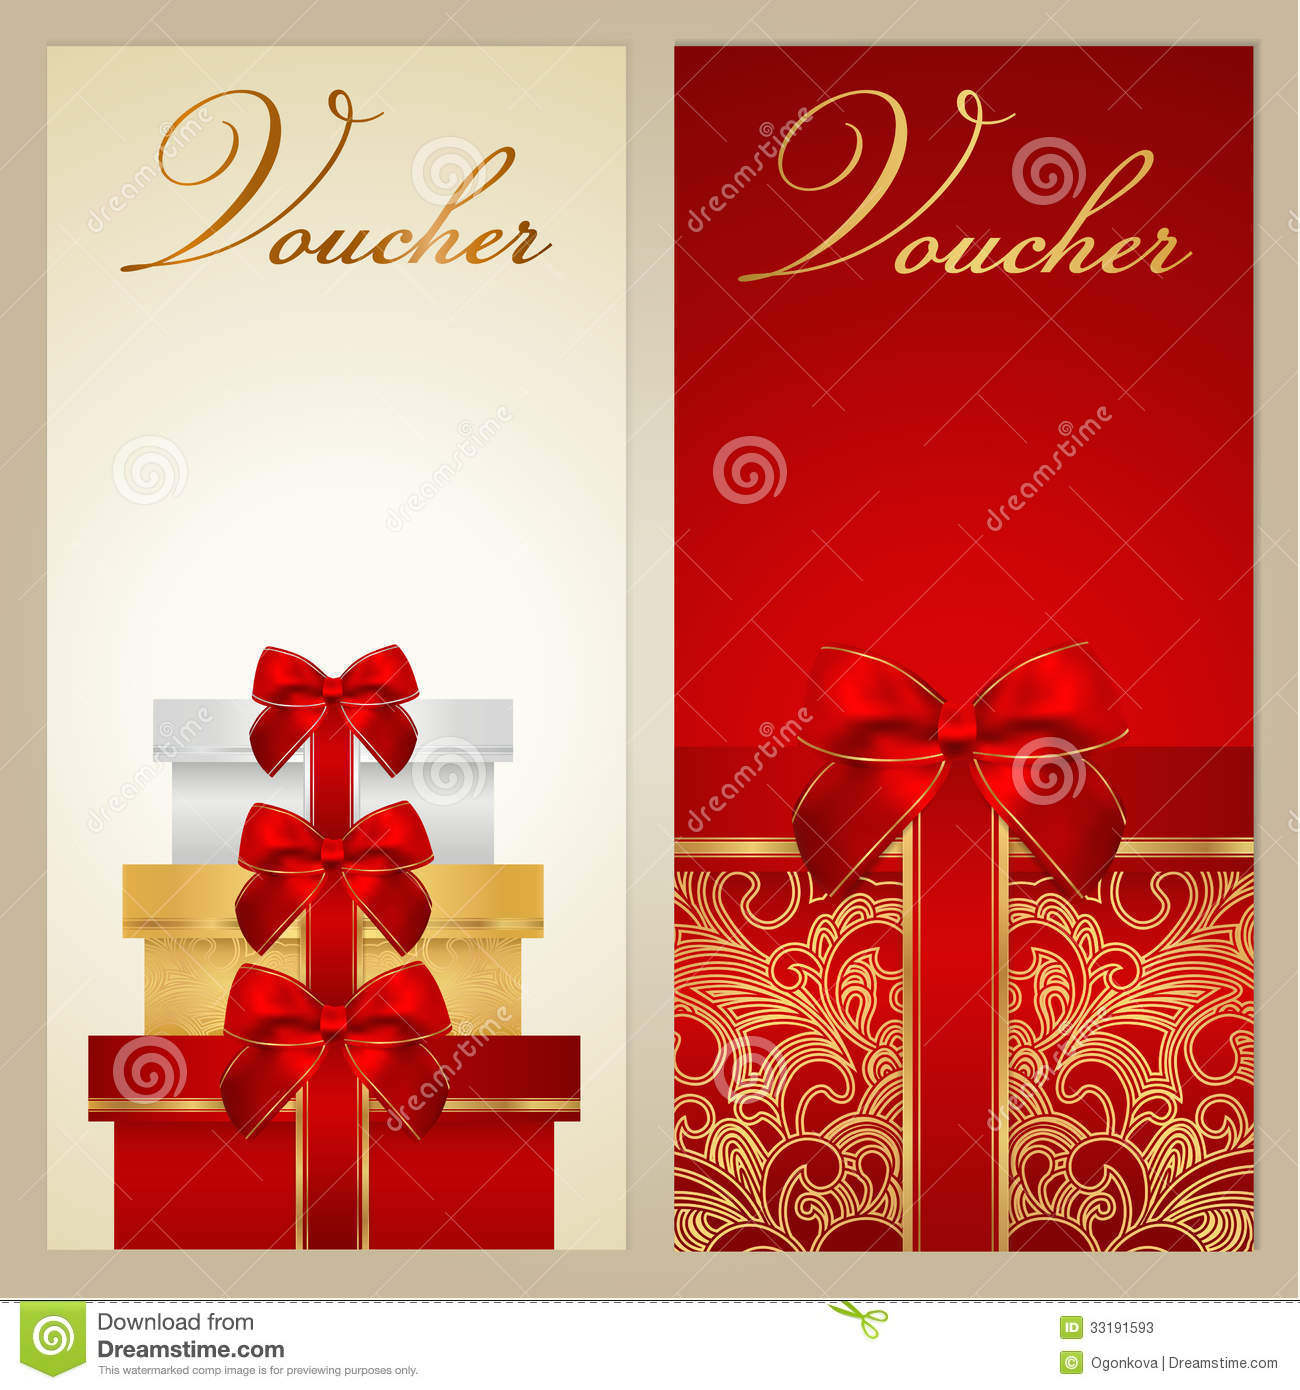 Voucher, Gift Certificate, Coupon. Boxes, Bow Stock Vector within Simple Birthday Gift Certificate Template Free 7 Ideas